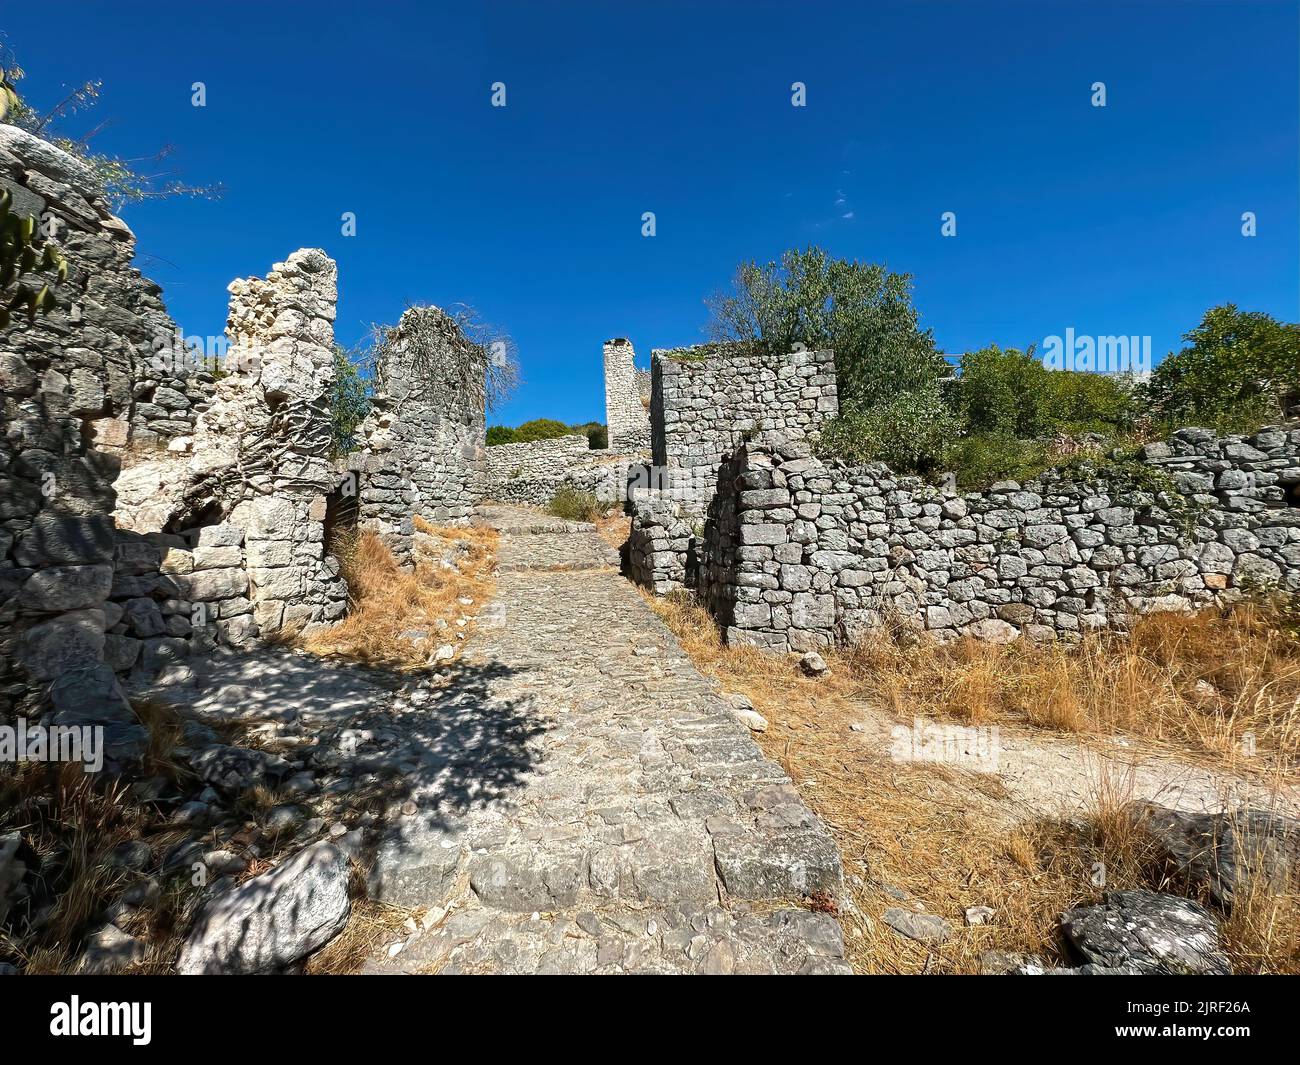 Scenery of the old medieval Templar vestige , fortress ruins at Allegre les fumades, Gard, France under a blue sunny sky Stock Photo